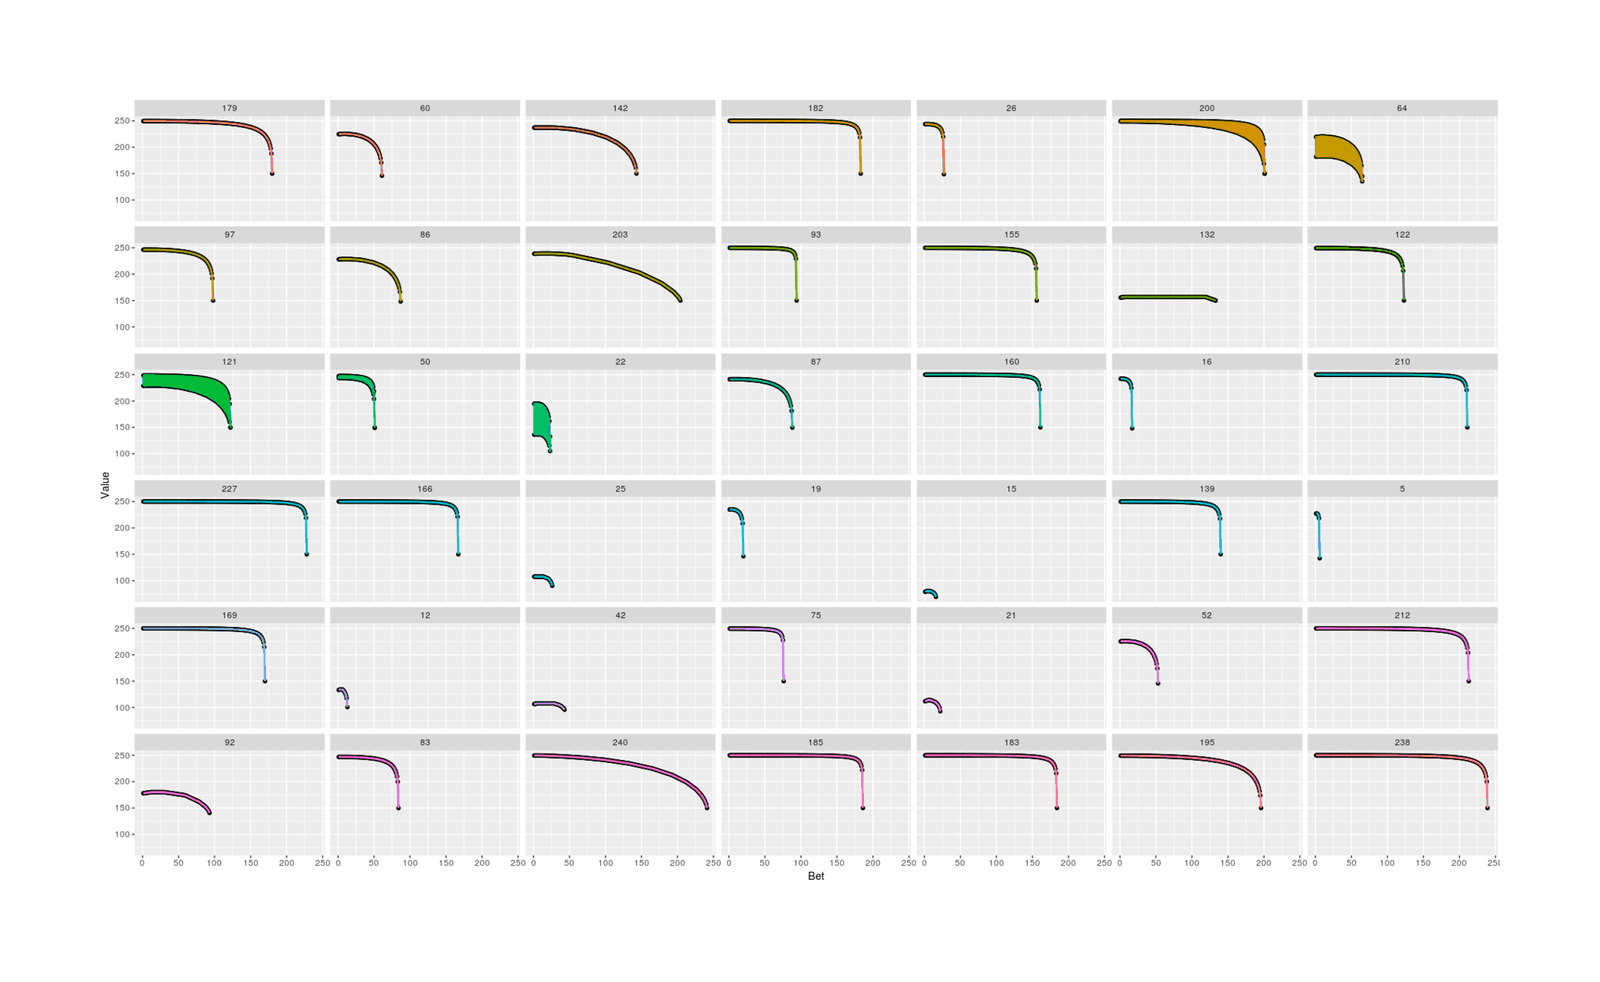 47 randomly-sampled states with all legal bets’ exact value plotted, showing generally smooth curves